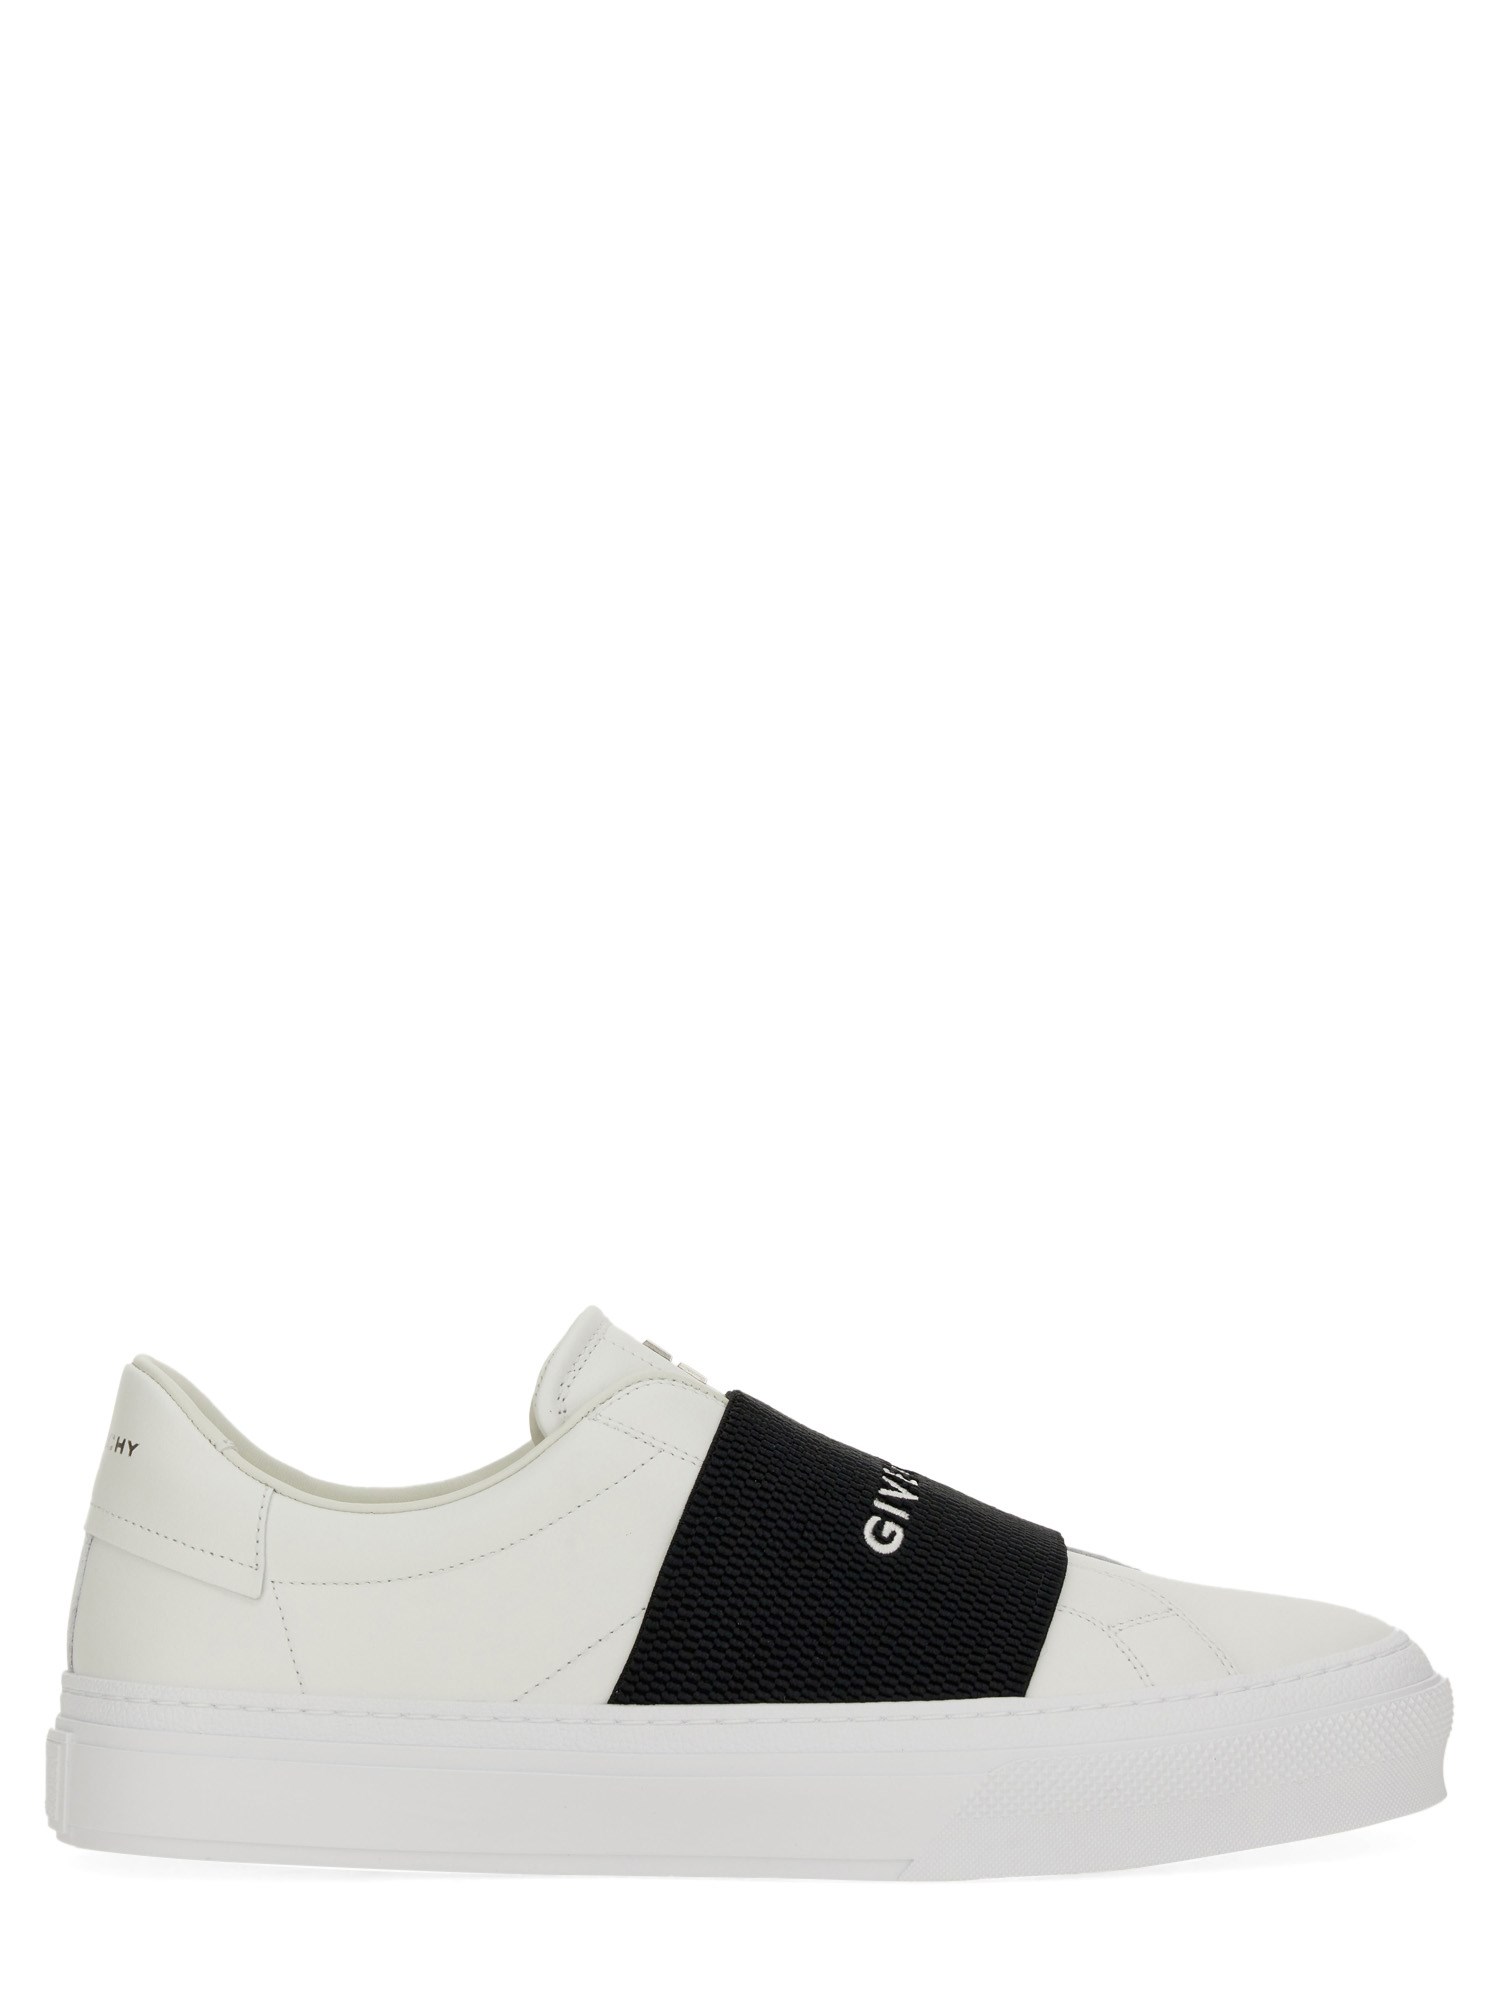 Givenchy givenchy leather sneaker